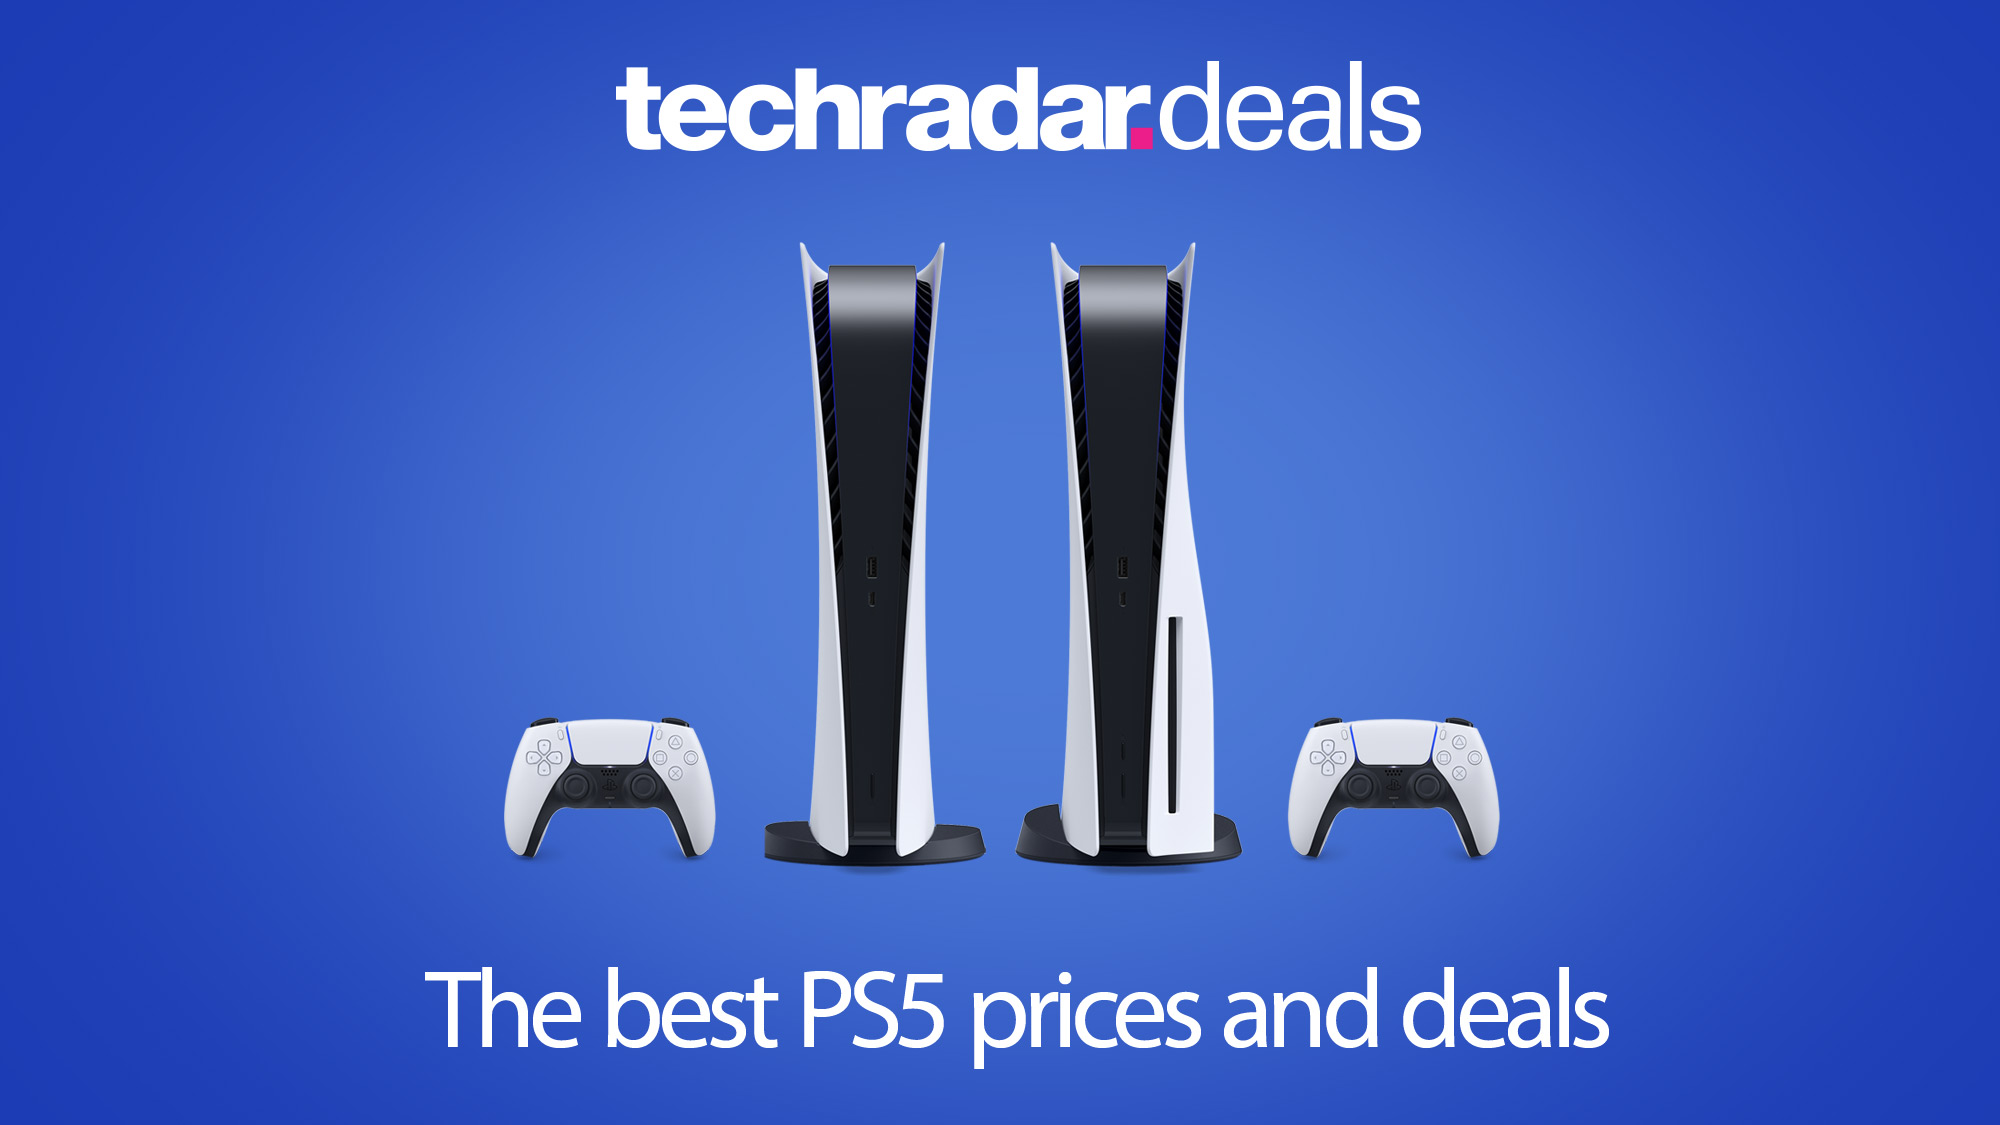 Ps5 Deals Top Offers On Consoles Games And Accessories For December 2021 Techradar